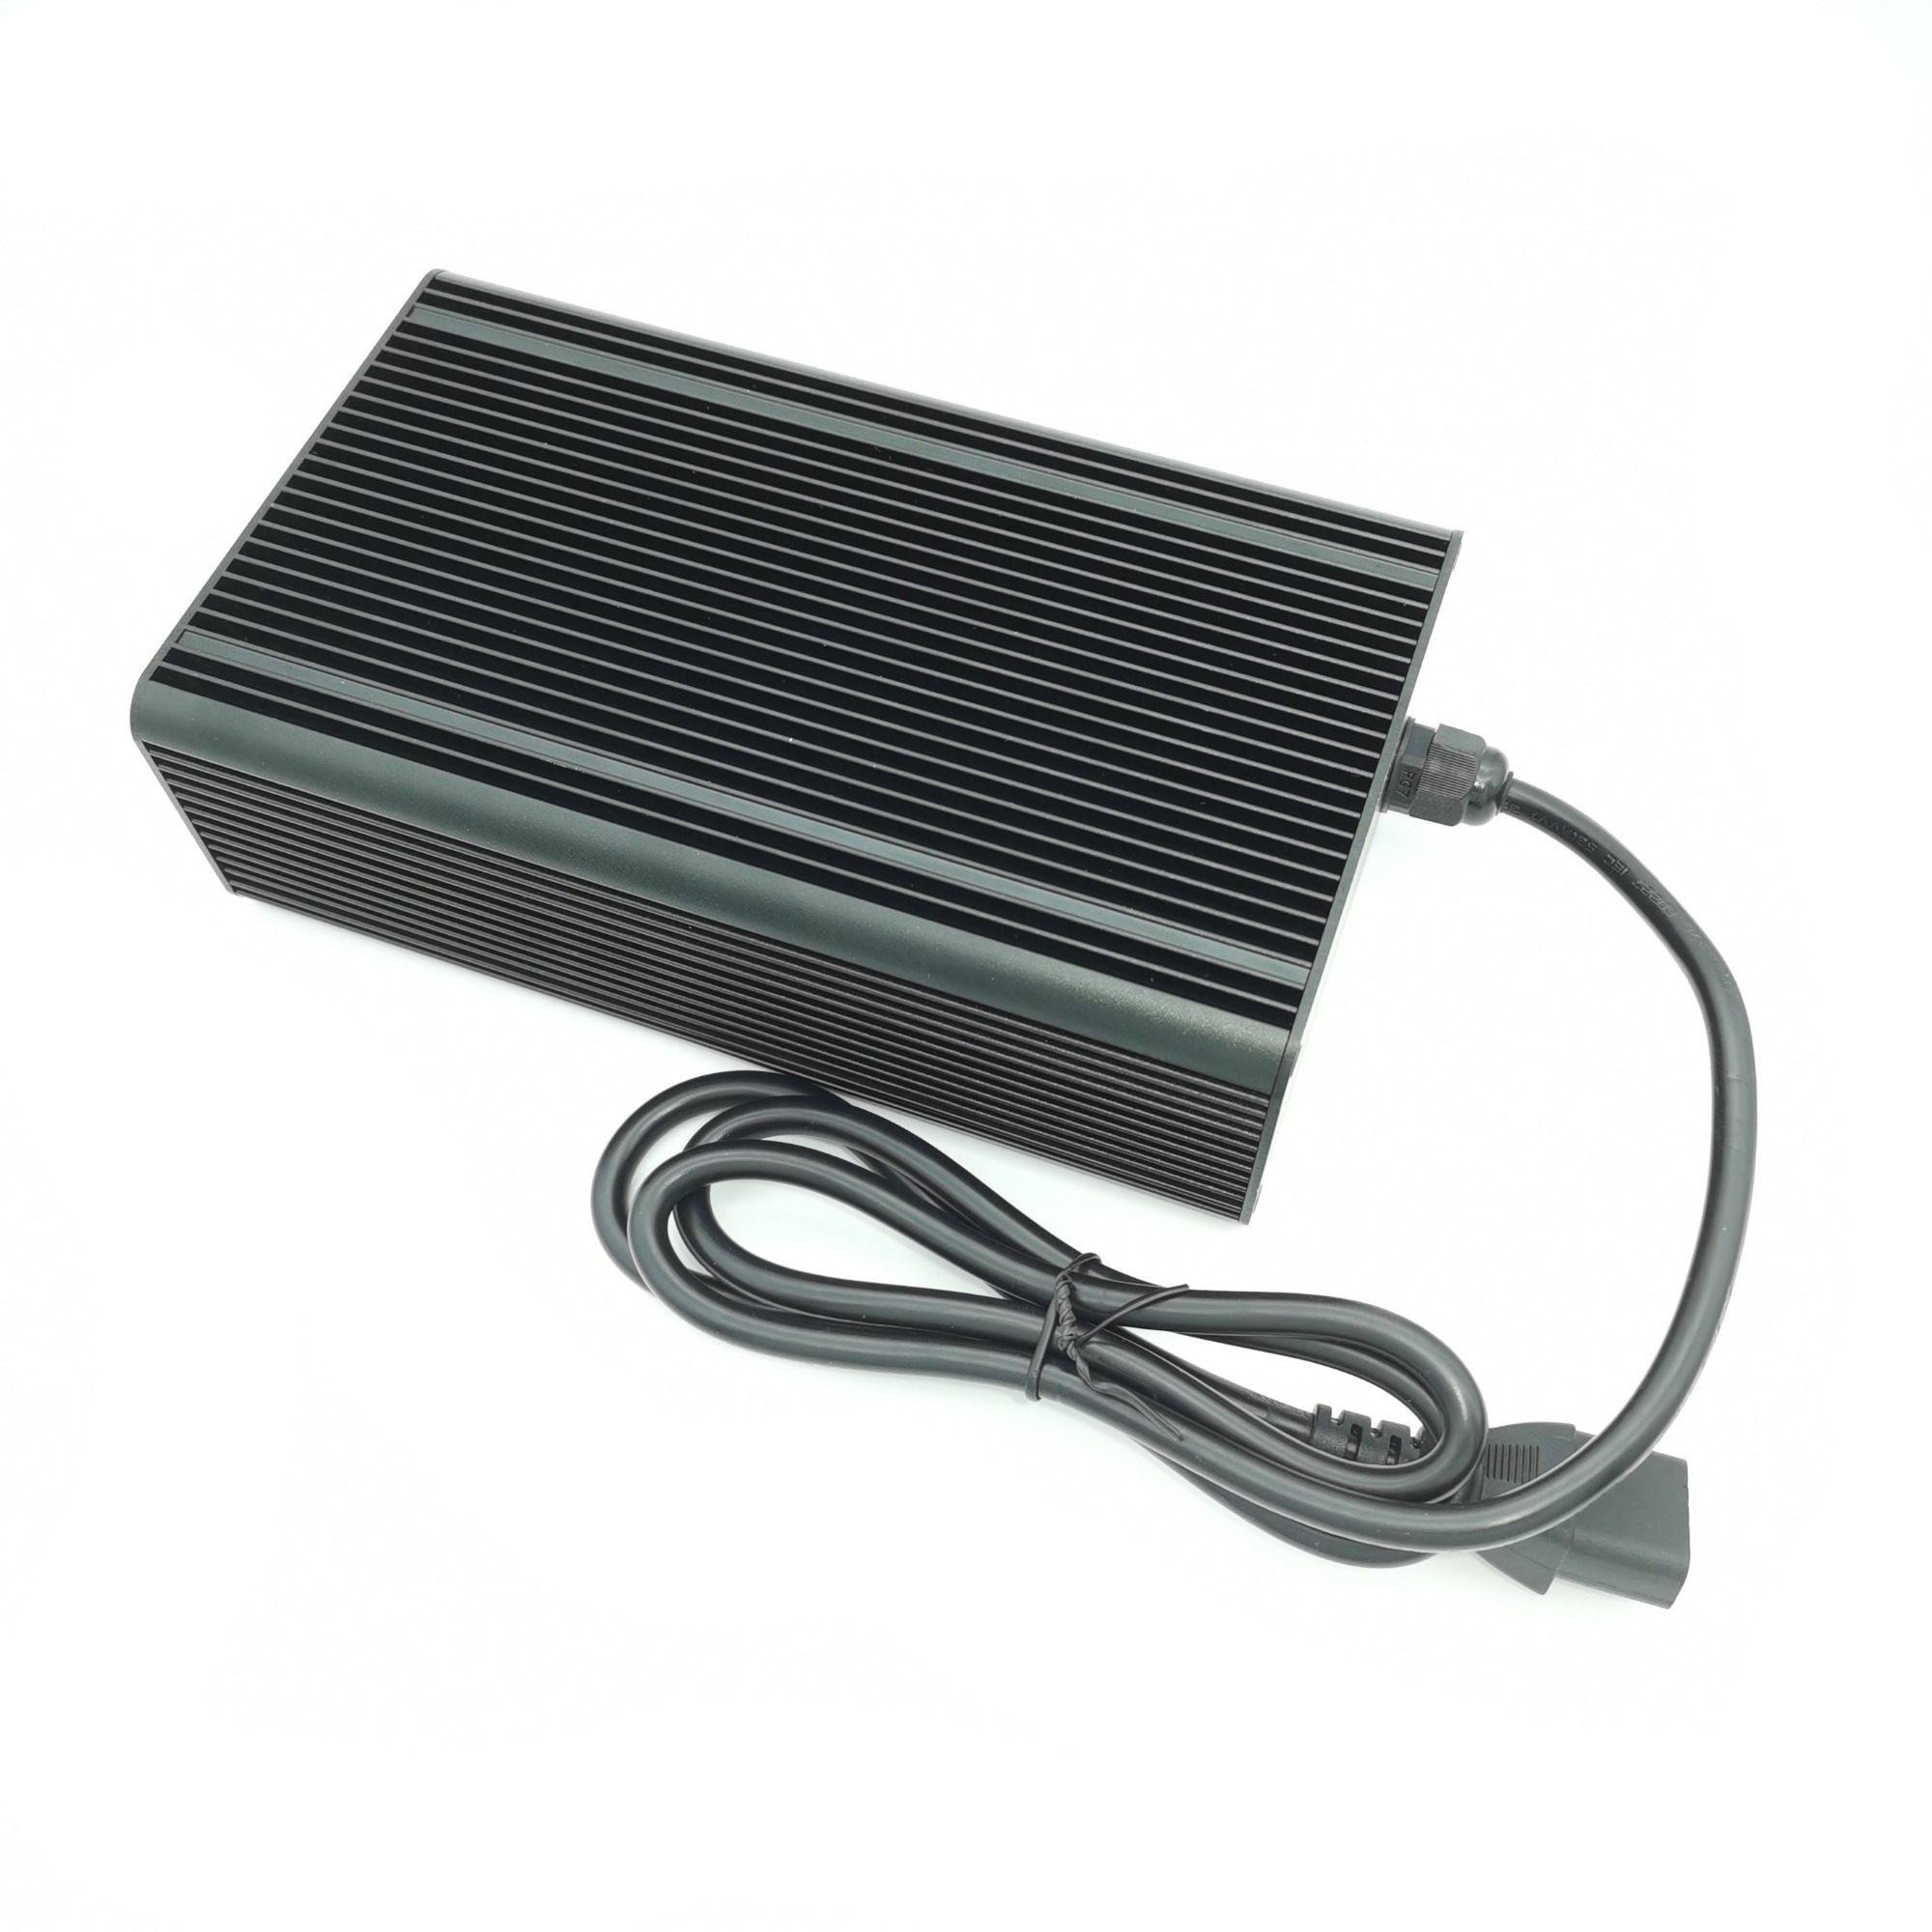 Smart Waterproof design 42V 8A Lithium battery charger For 36V 10S Li-ion Battery charger Electric Scooter E-bike motorcycle